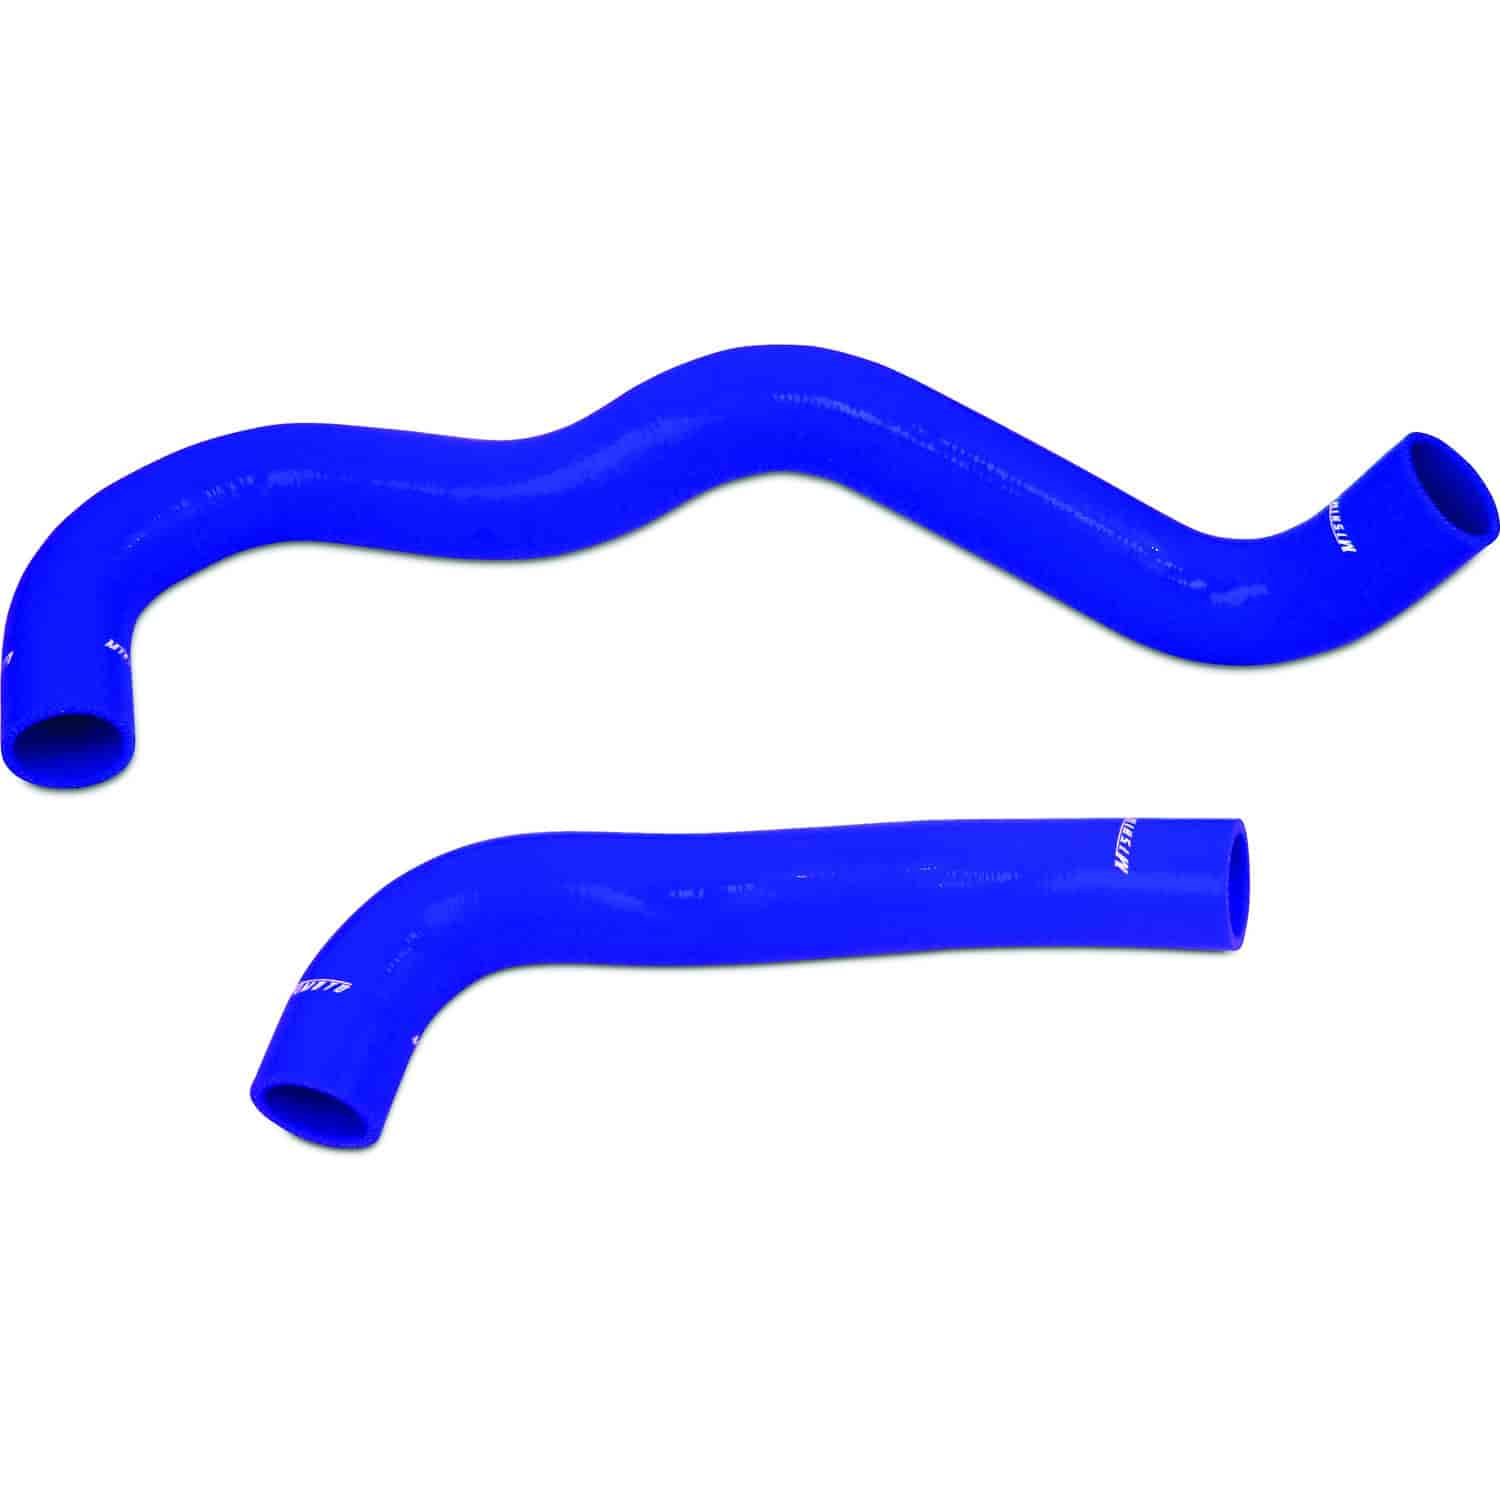 Silicone Radiator Hose Kit for 2003-2004 Ford 6.0L Powerstroke [Blue]